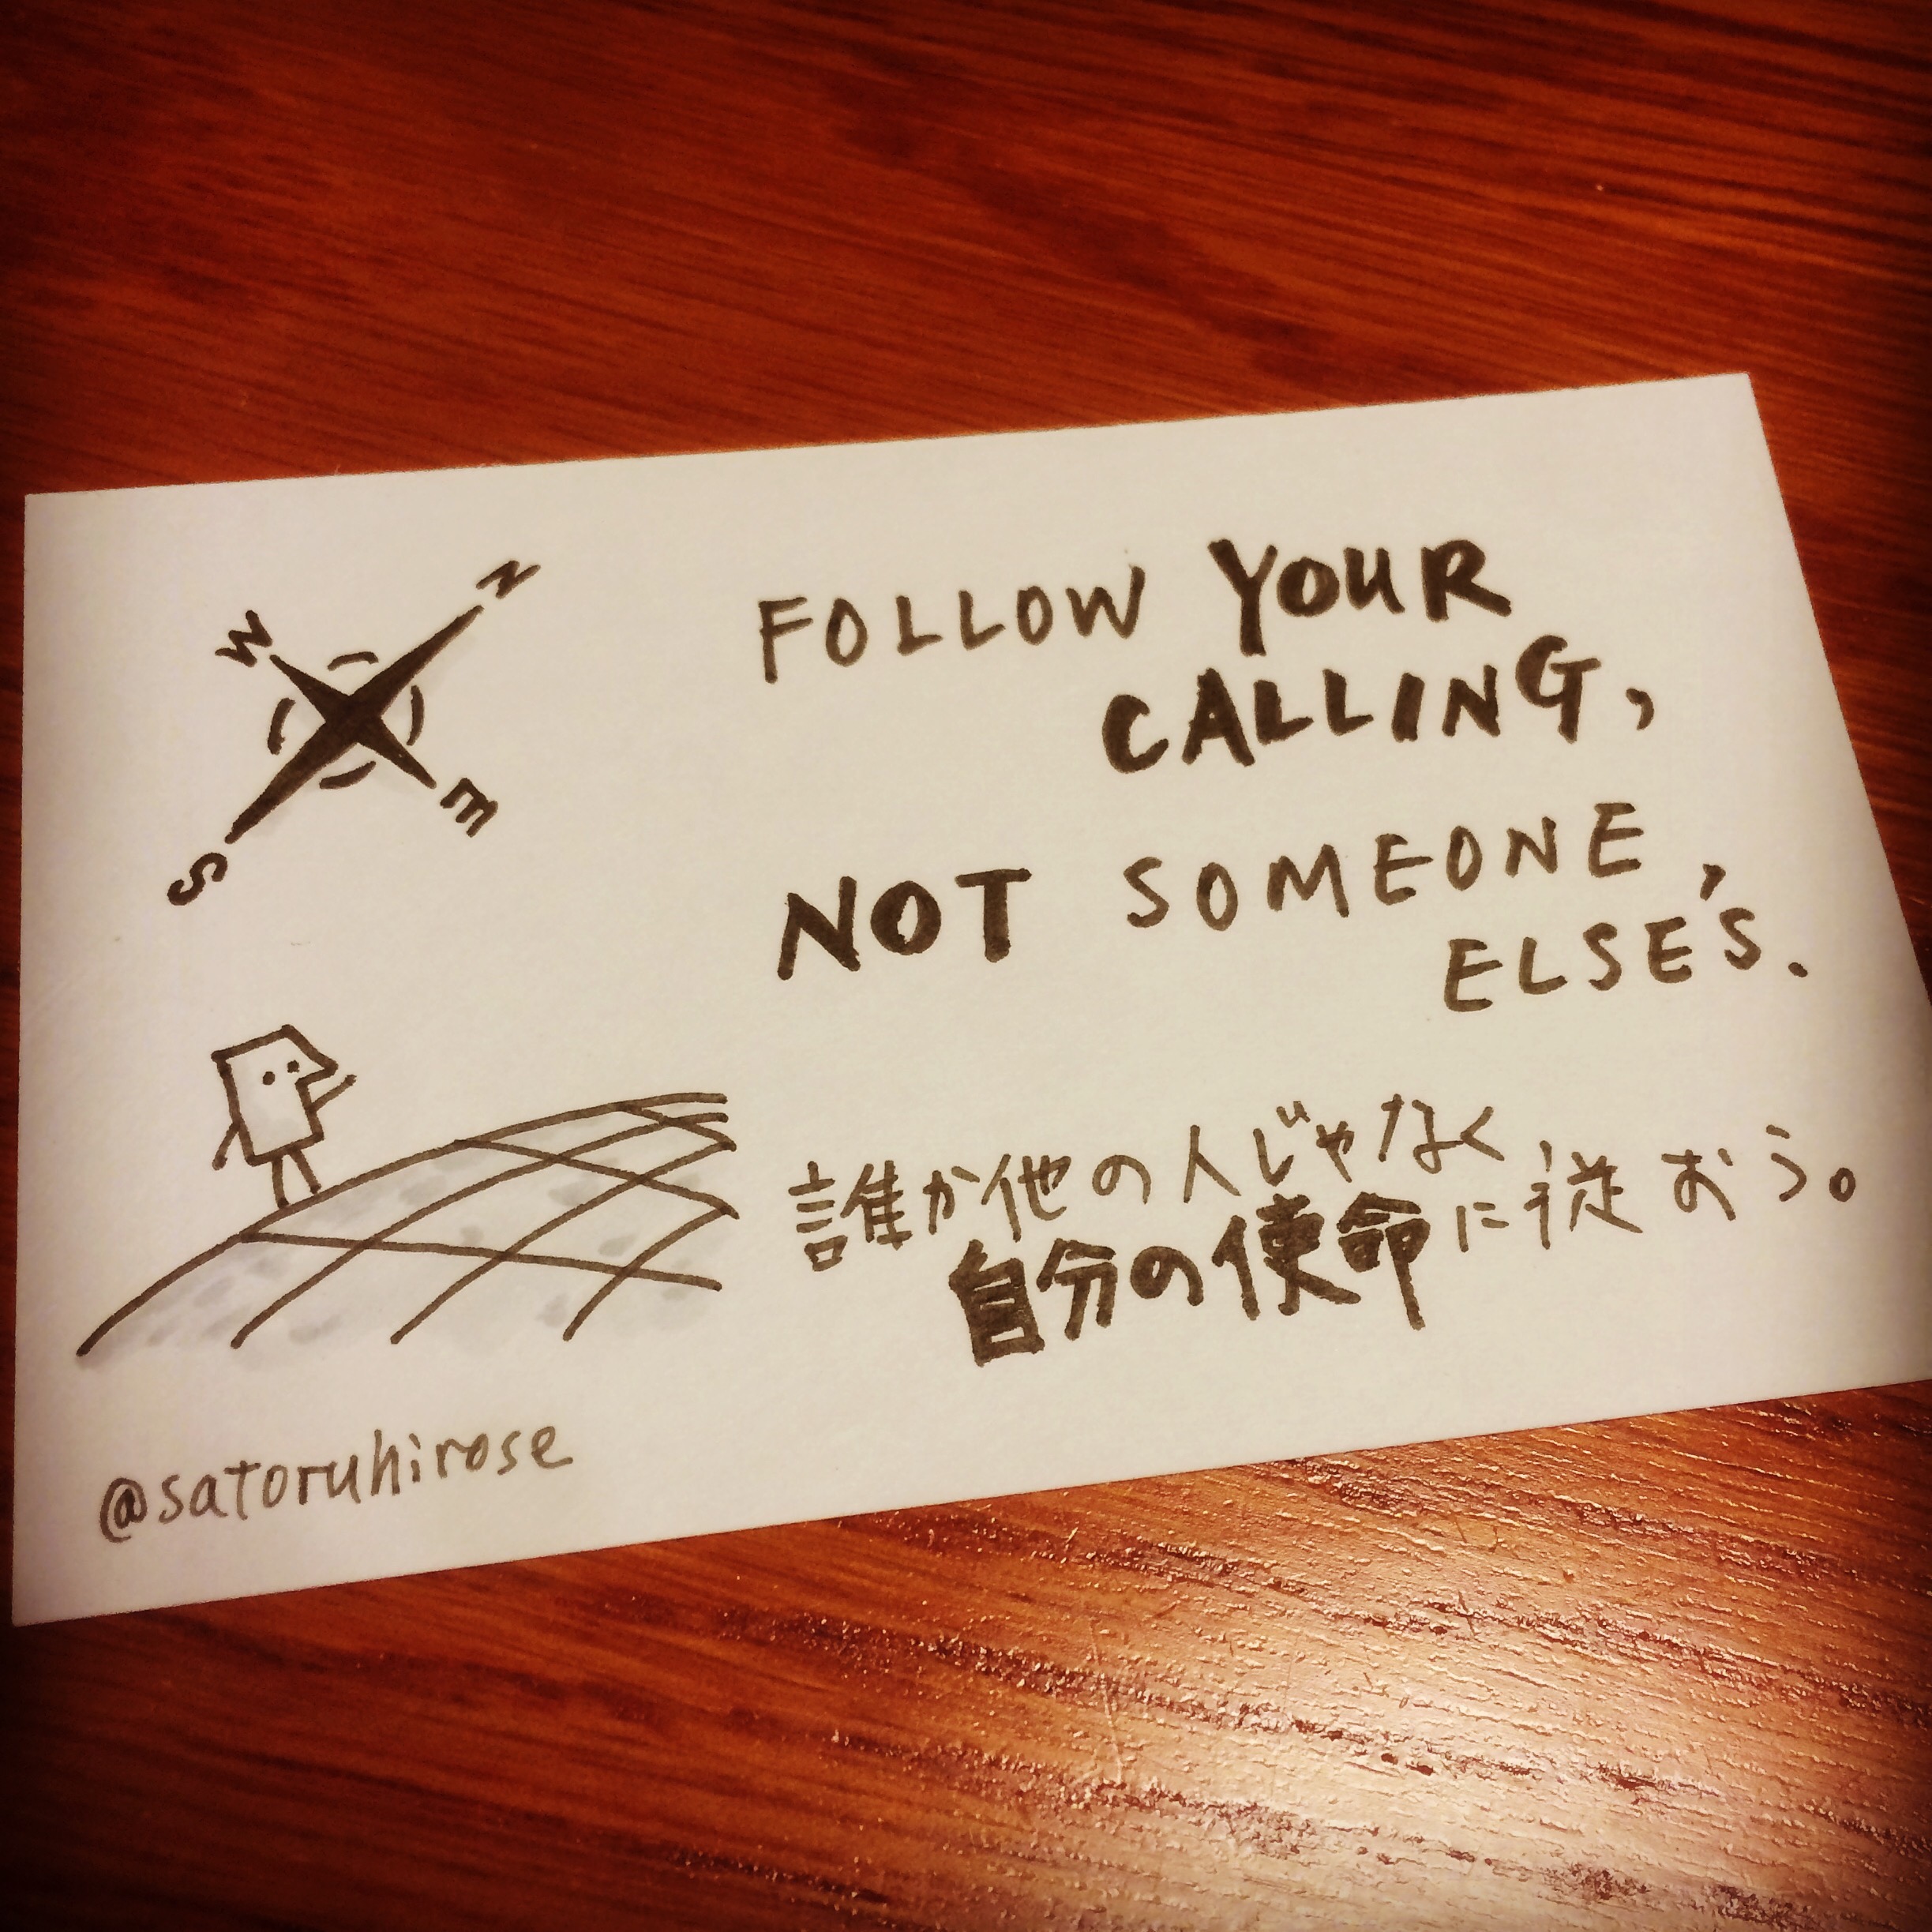 Follow your calling, not someone else's.